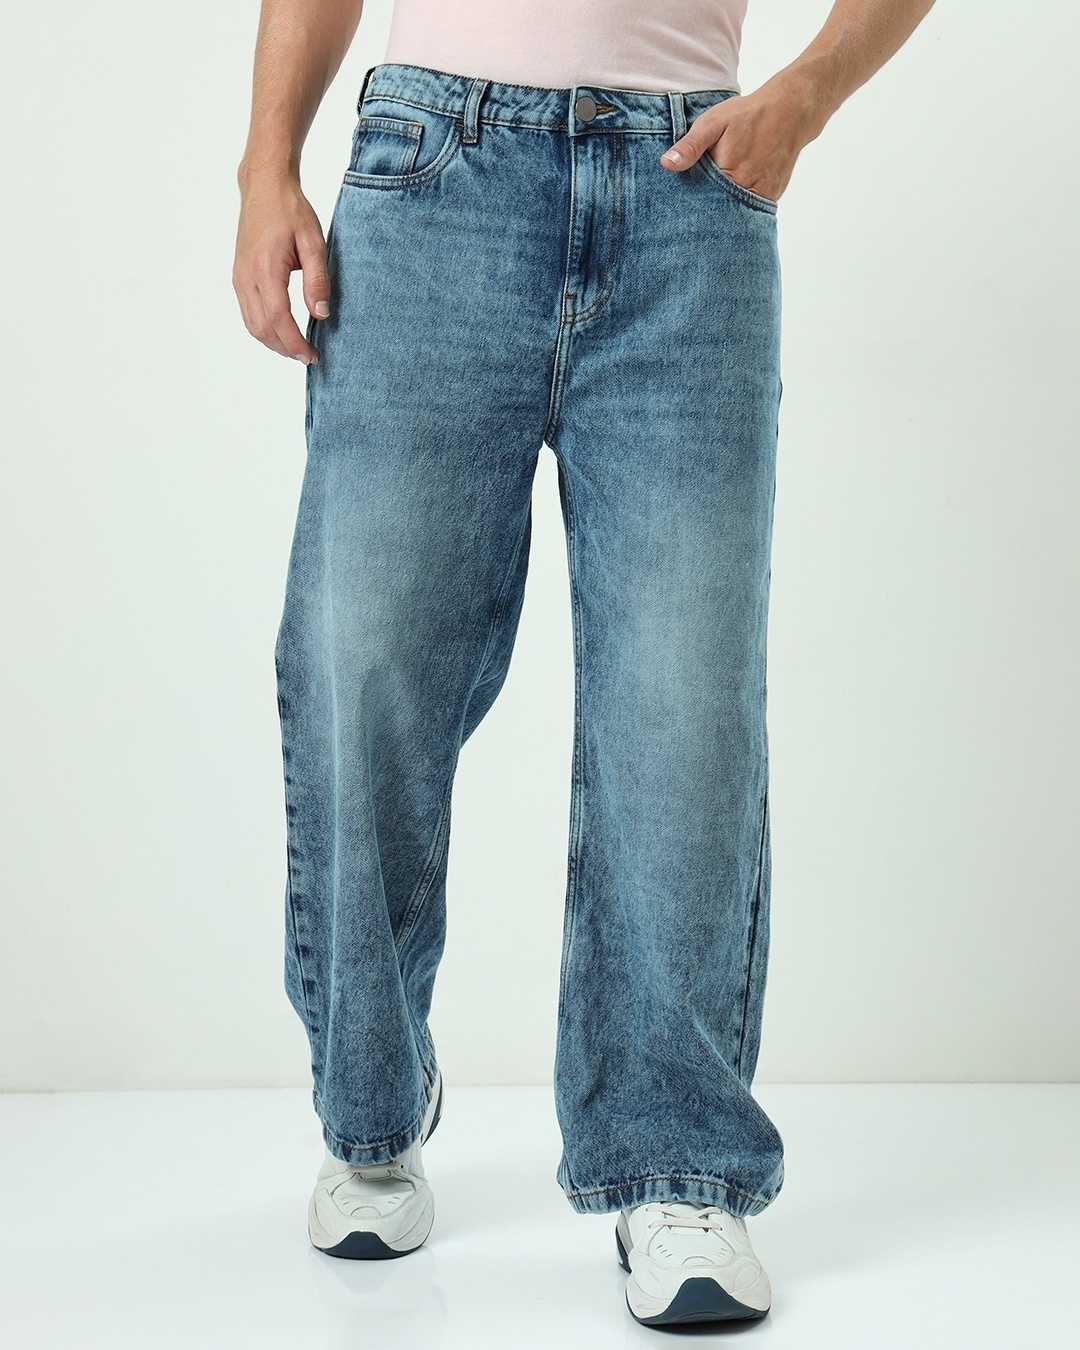 Men's Blue Baggy Straight Fit Jeans paired with clogs and crocs